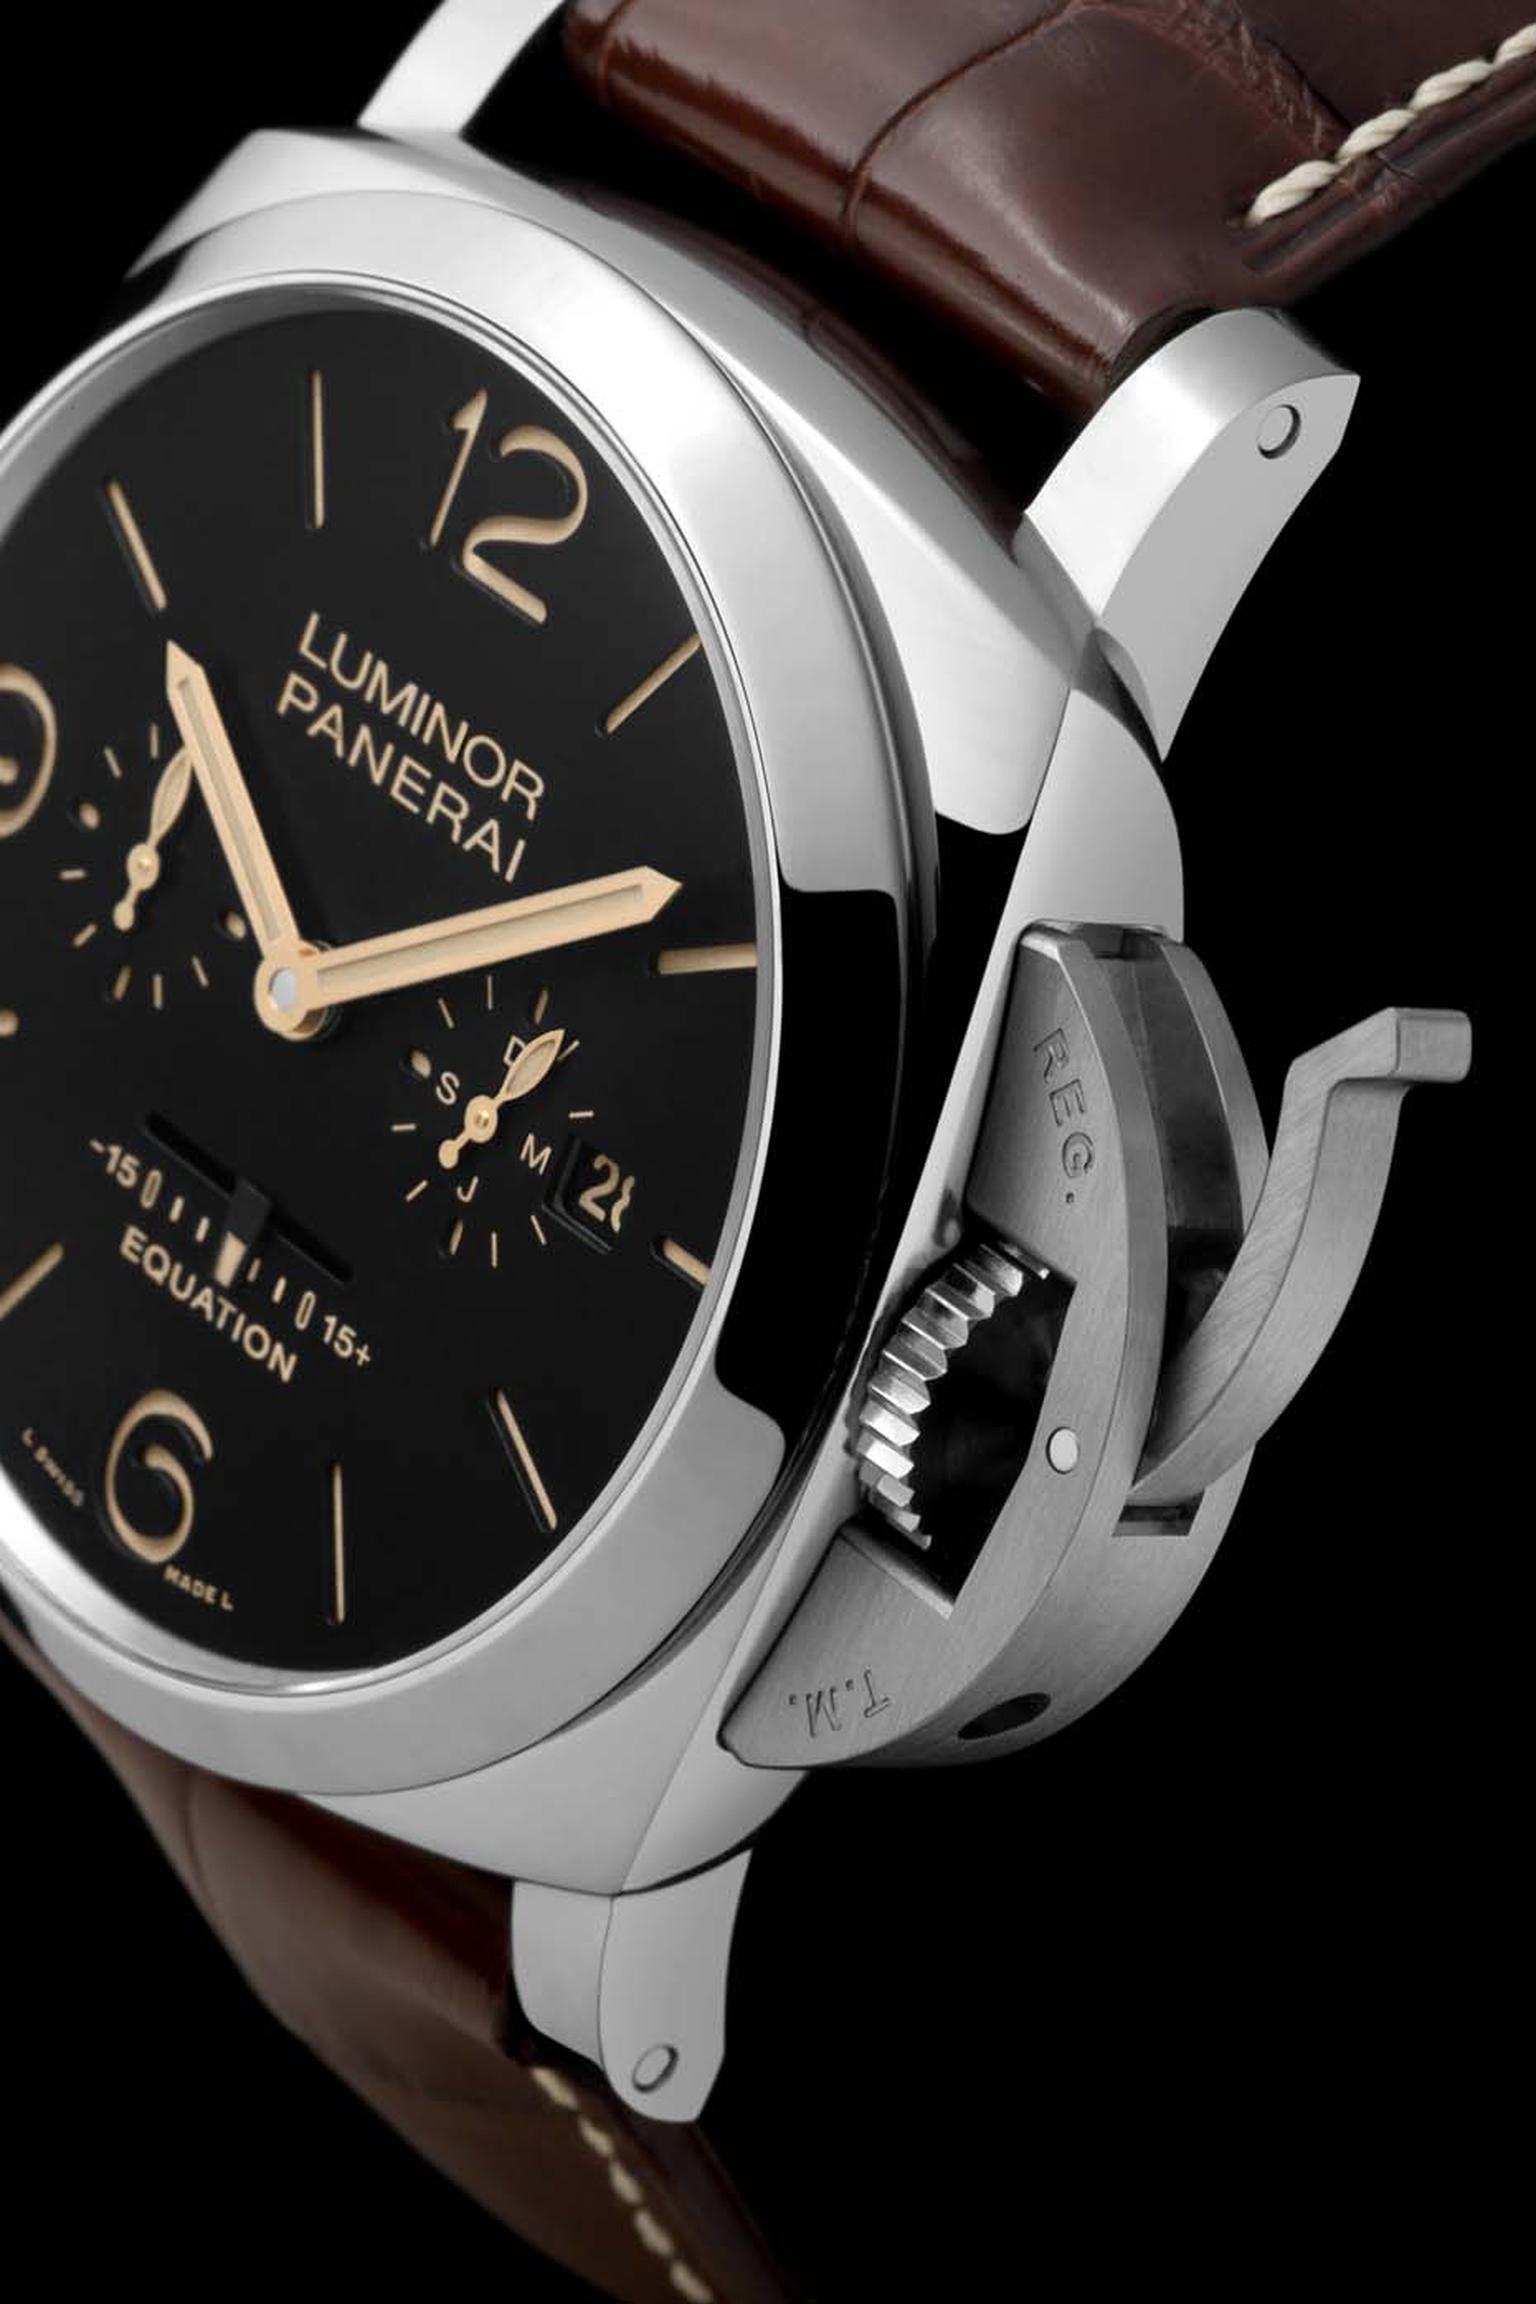 Panerai Luminor 1950 Equation of Time watch, with its distinctive bridge device to lock the crown, was produced a few years after the Radiomir. The brand's portfolio of watches is almost entirely built around these two models.